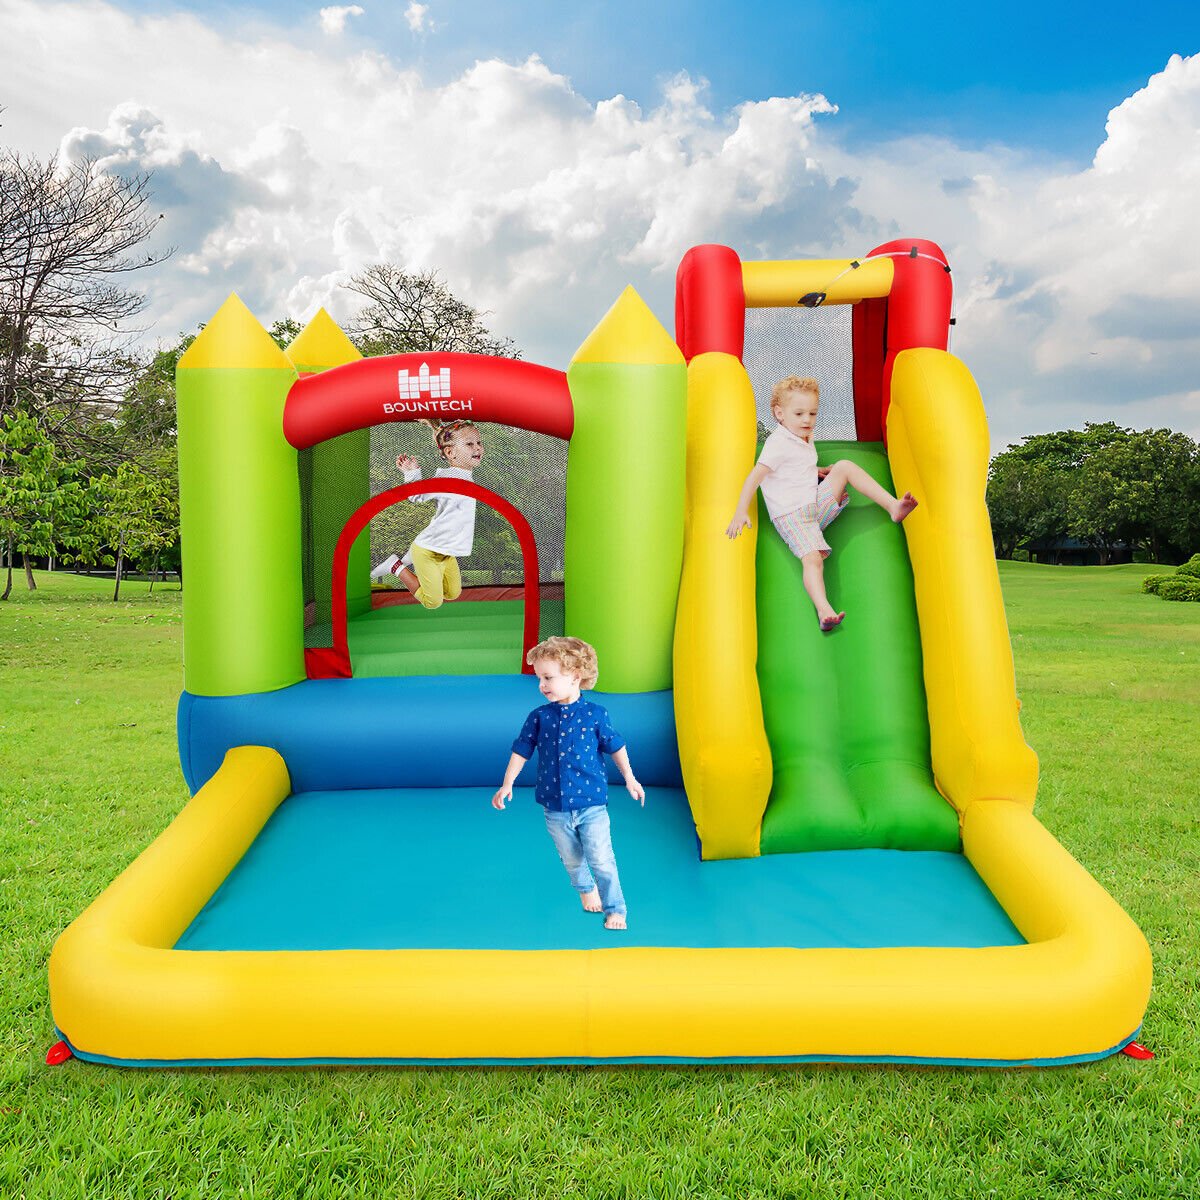 Splashy Inflatable Jumping Castle - Water Slide & Pool Fun (Blower Included)